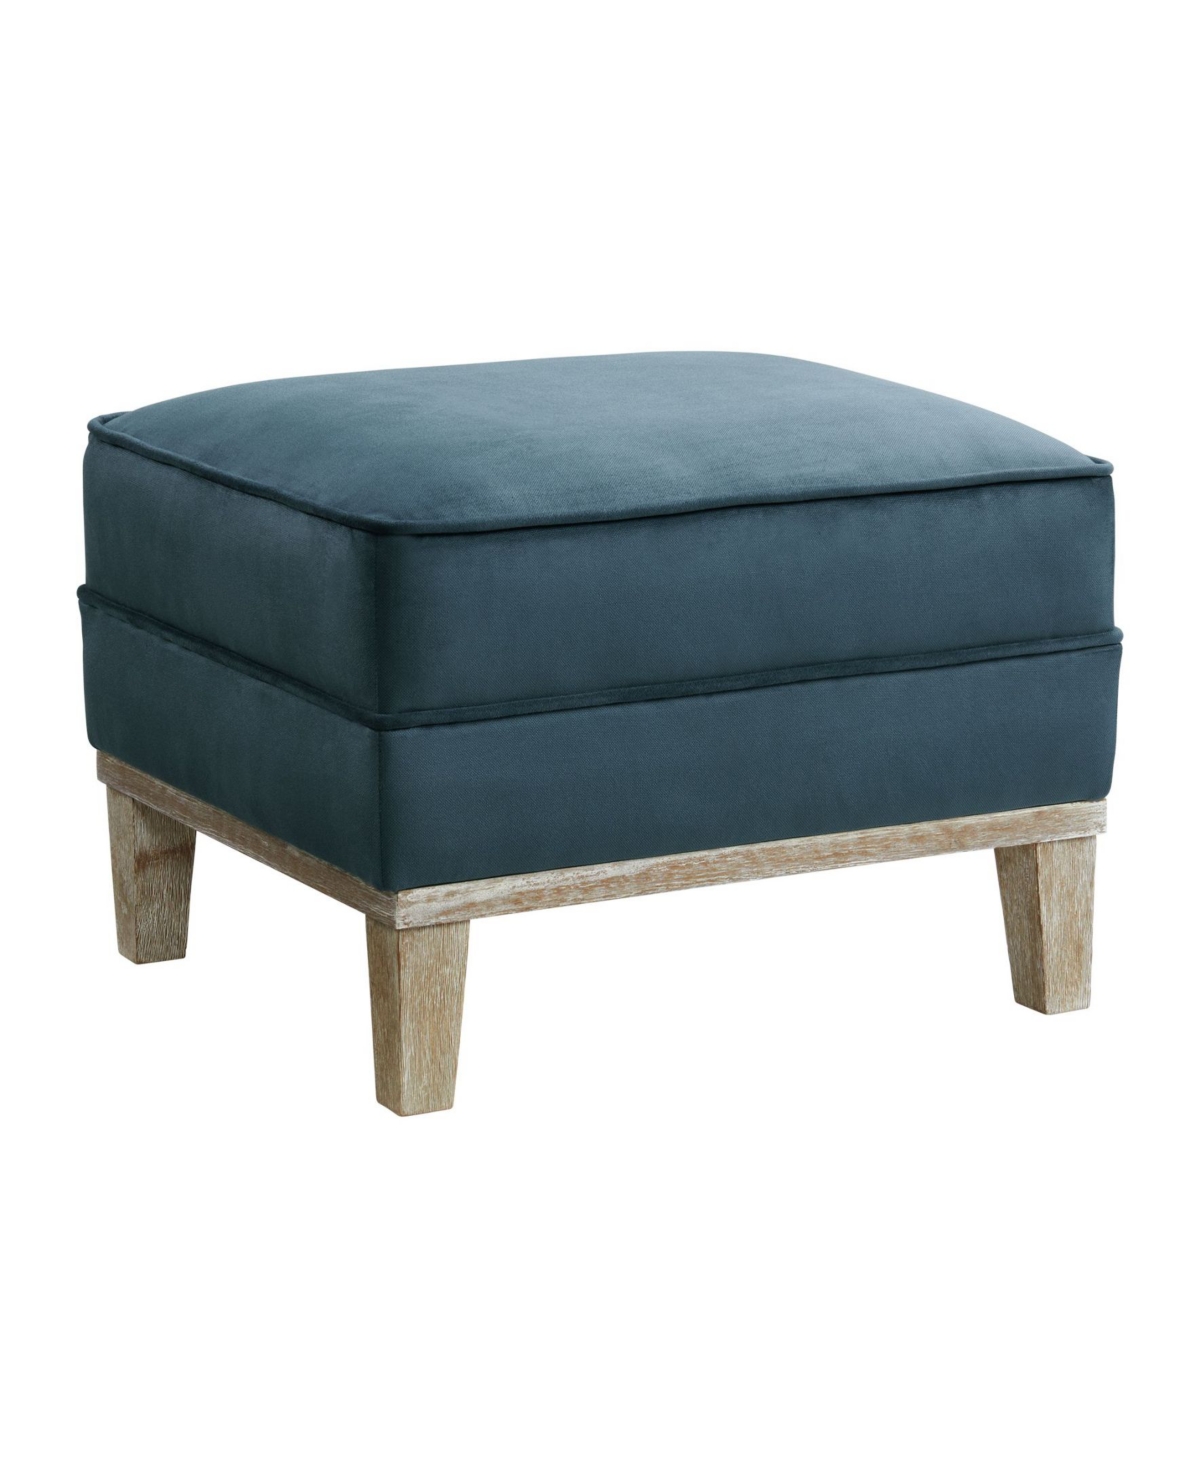 Picket House Furnishings Aster Ottoman